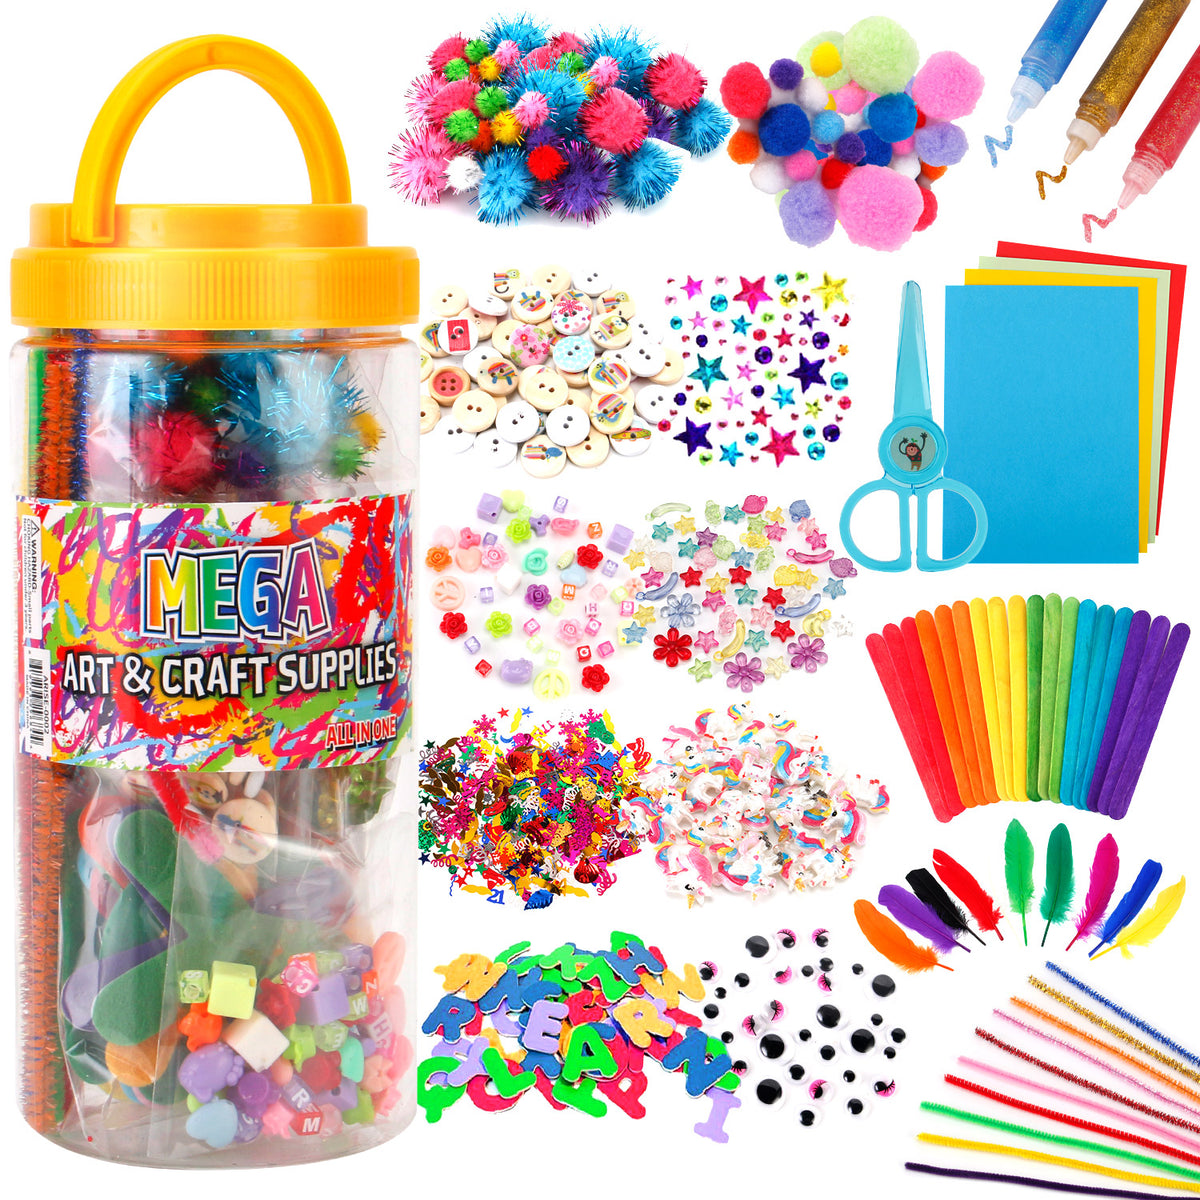 Kids Art Supplies Jar Colorful and Creative Arts and Crafts Materials - Glue, Safety Scissors, Pompoms, Popsicle Sticks,etc.